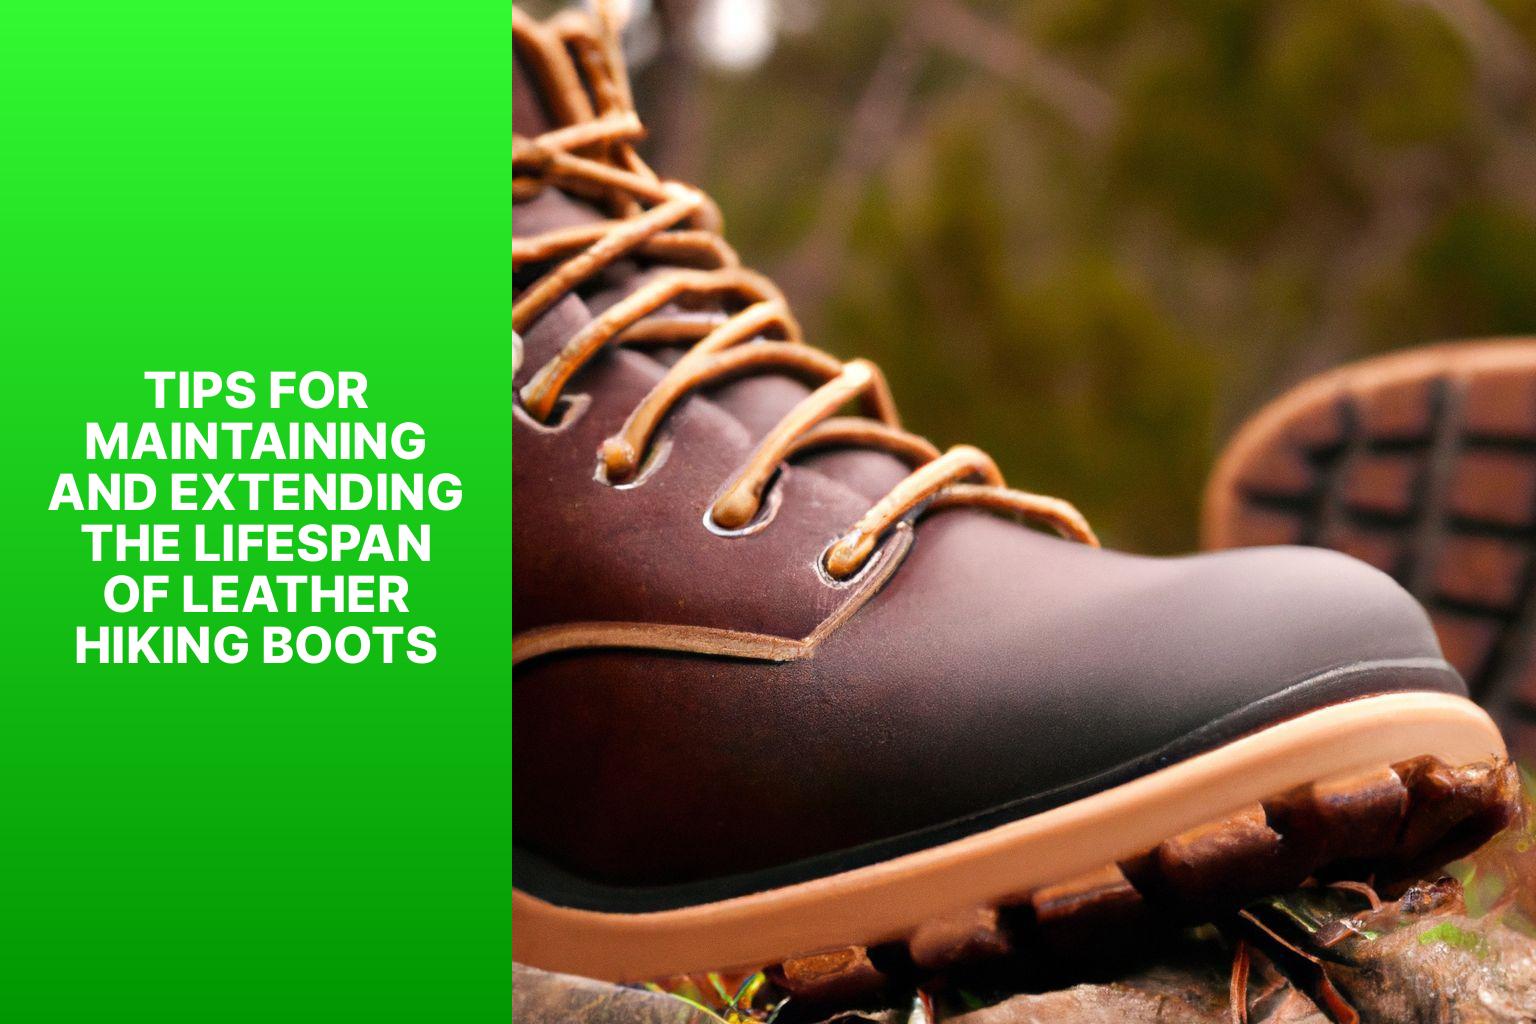 Tips for Maintaining and Extending the Lifespan of Leather Hiking Boots - How to Clean Leather Hiking Boots 